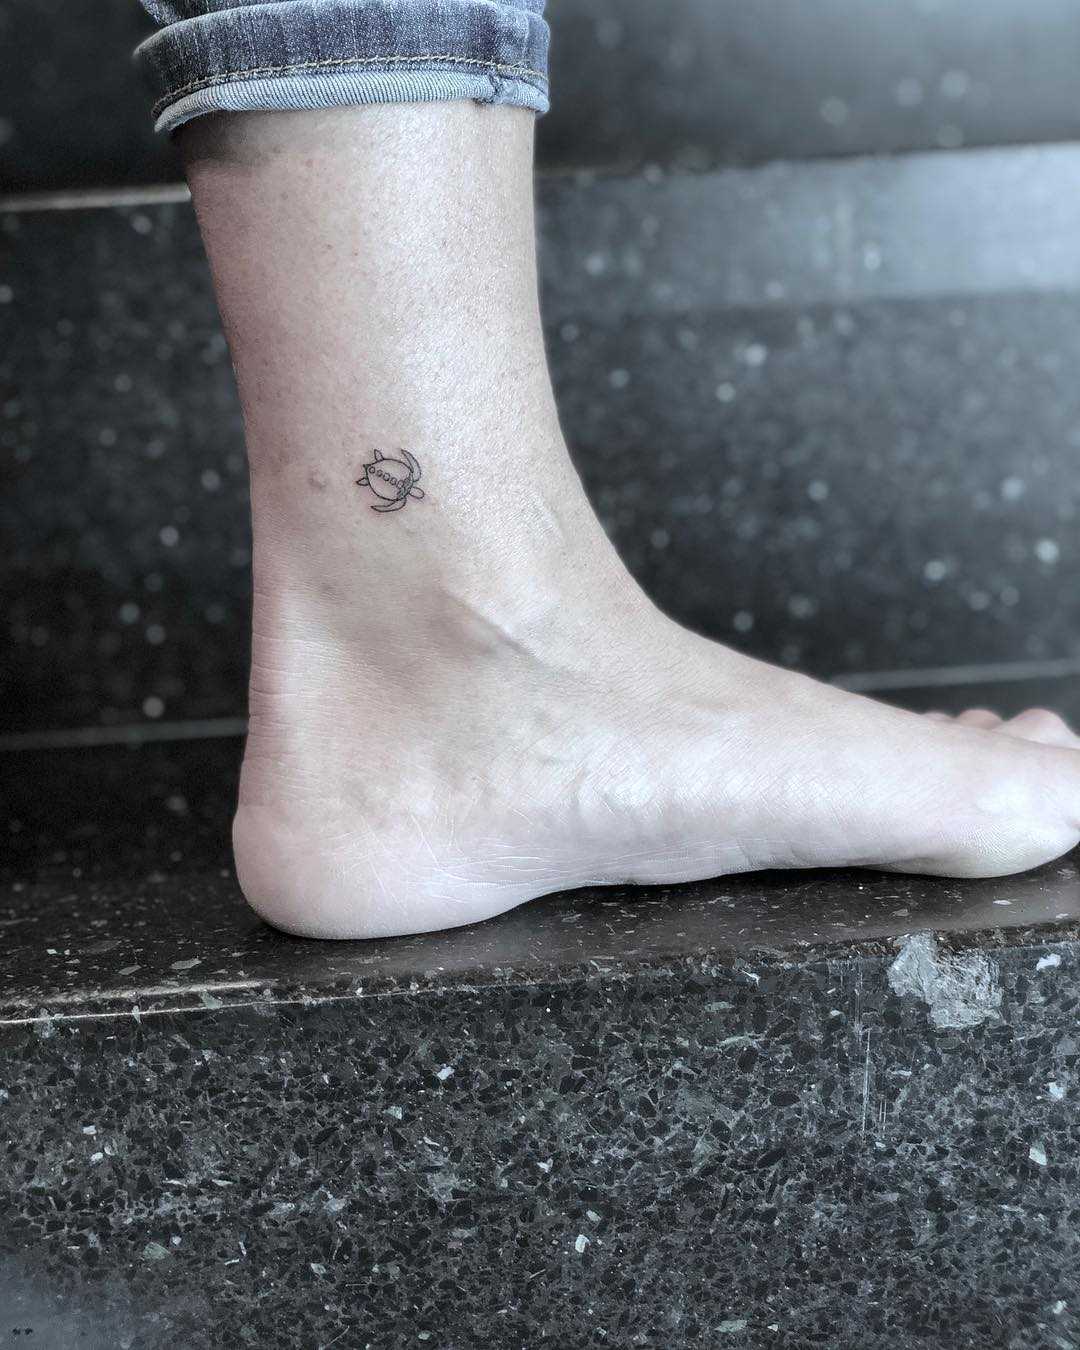 Tiny turtle tattoo on the ankle